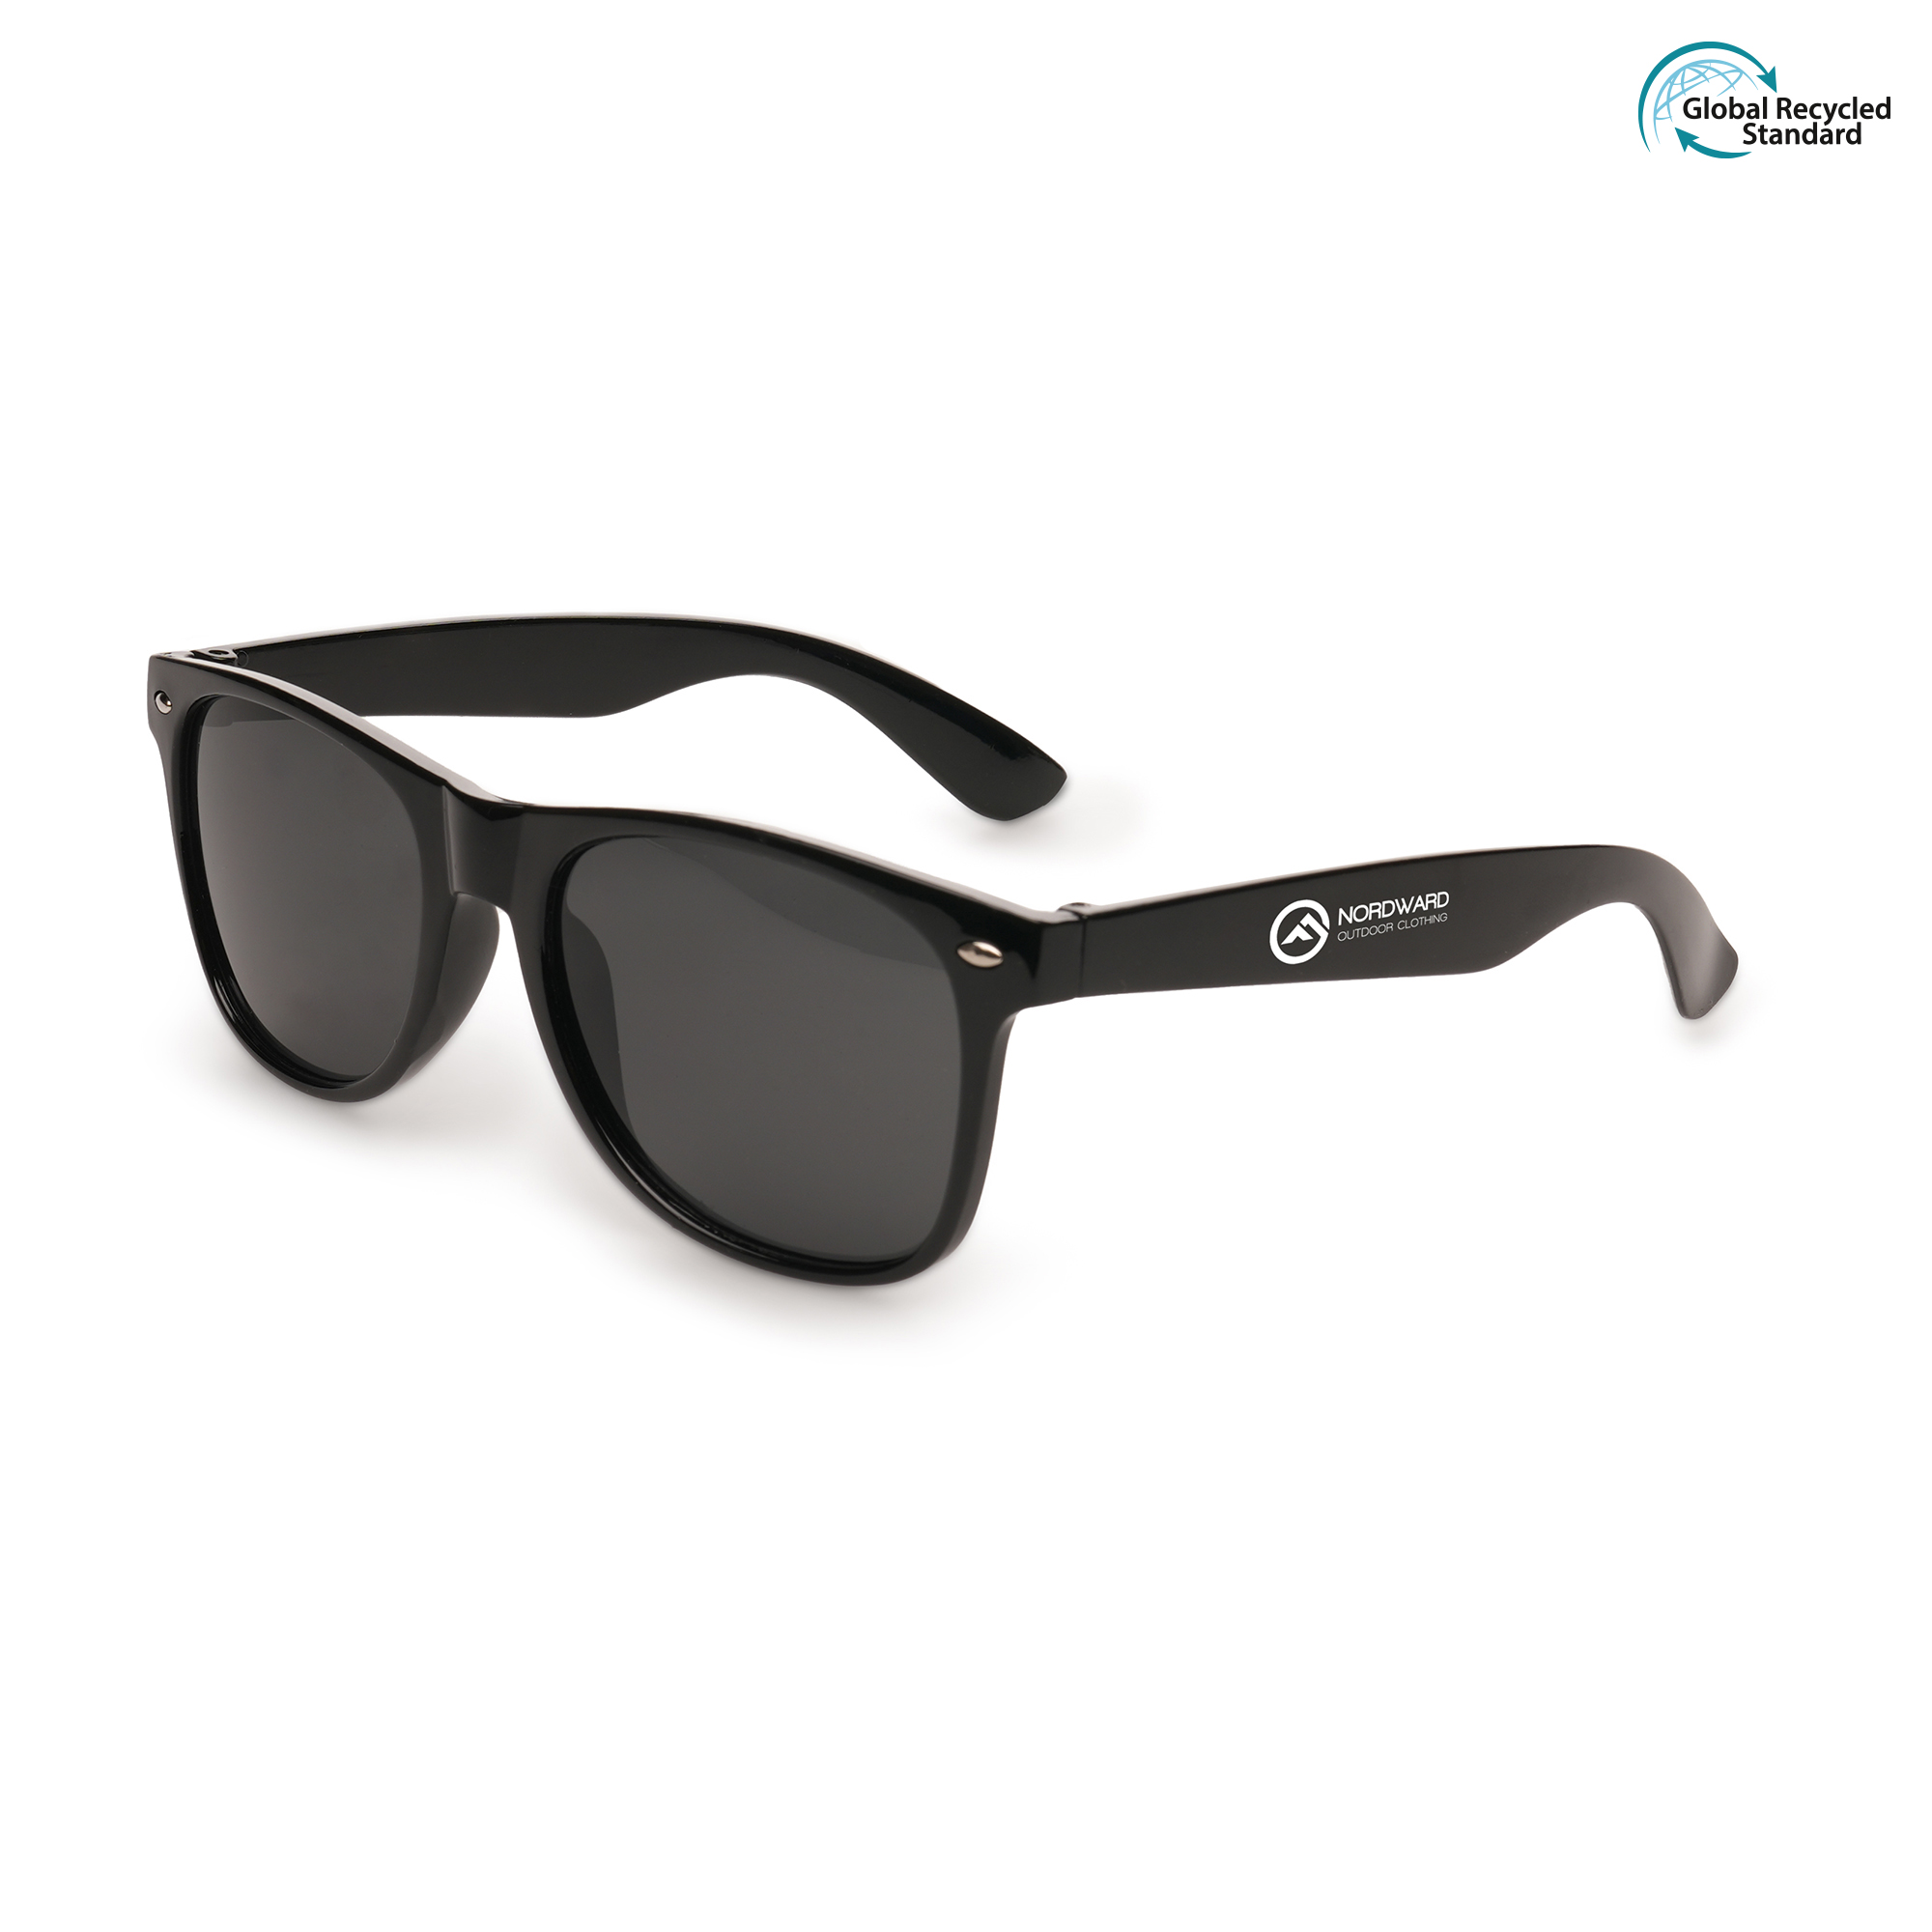 One size sunglasses with recycled ABS plastic, matt finish and tinted PC plastic lens. Eye protection up to UV400.